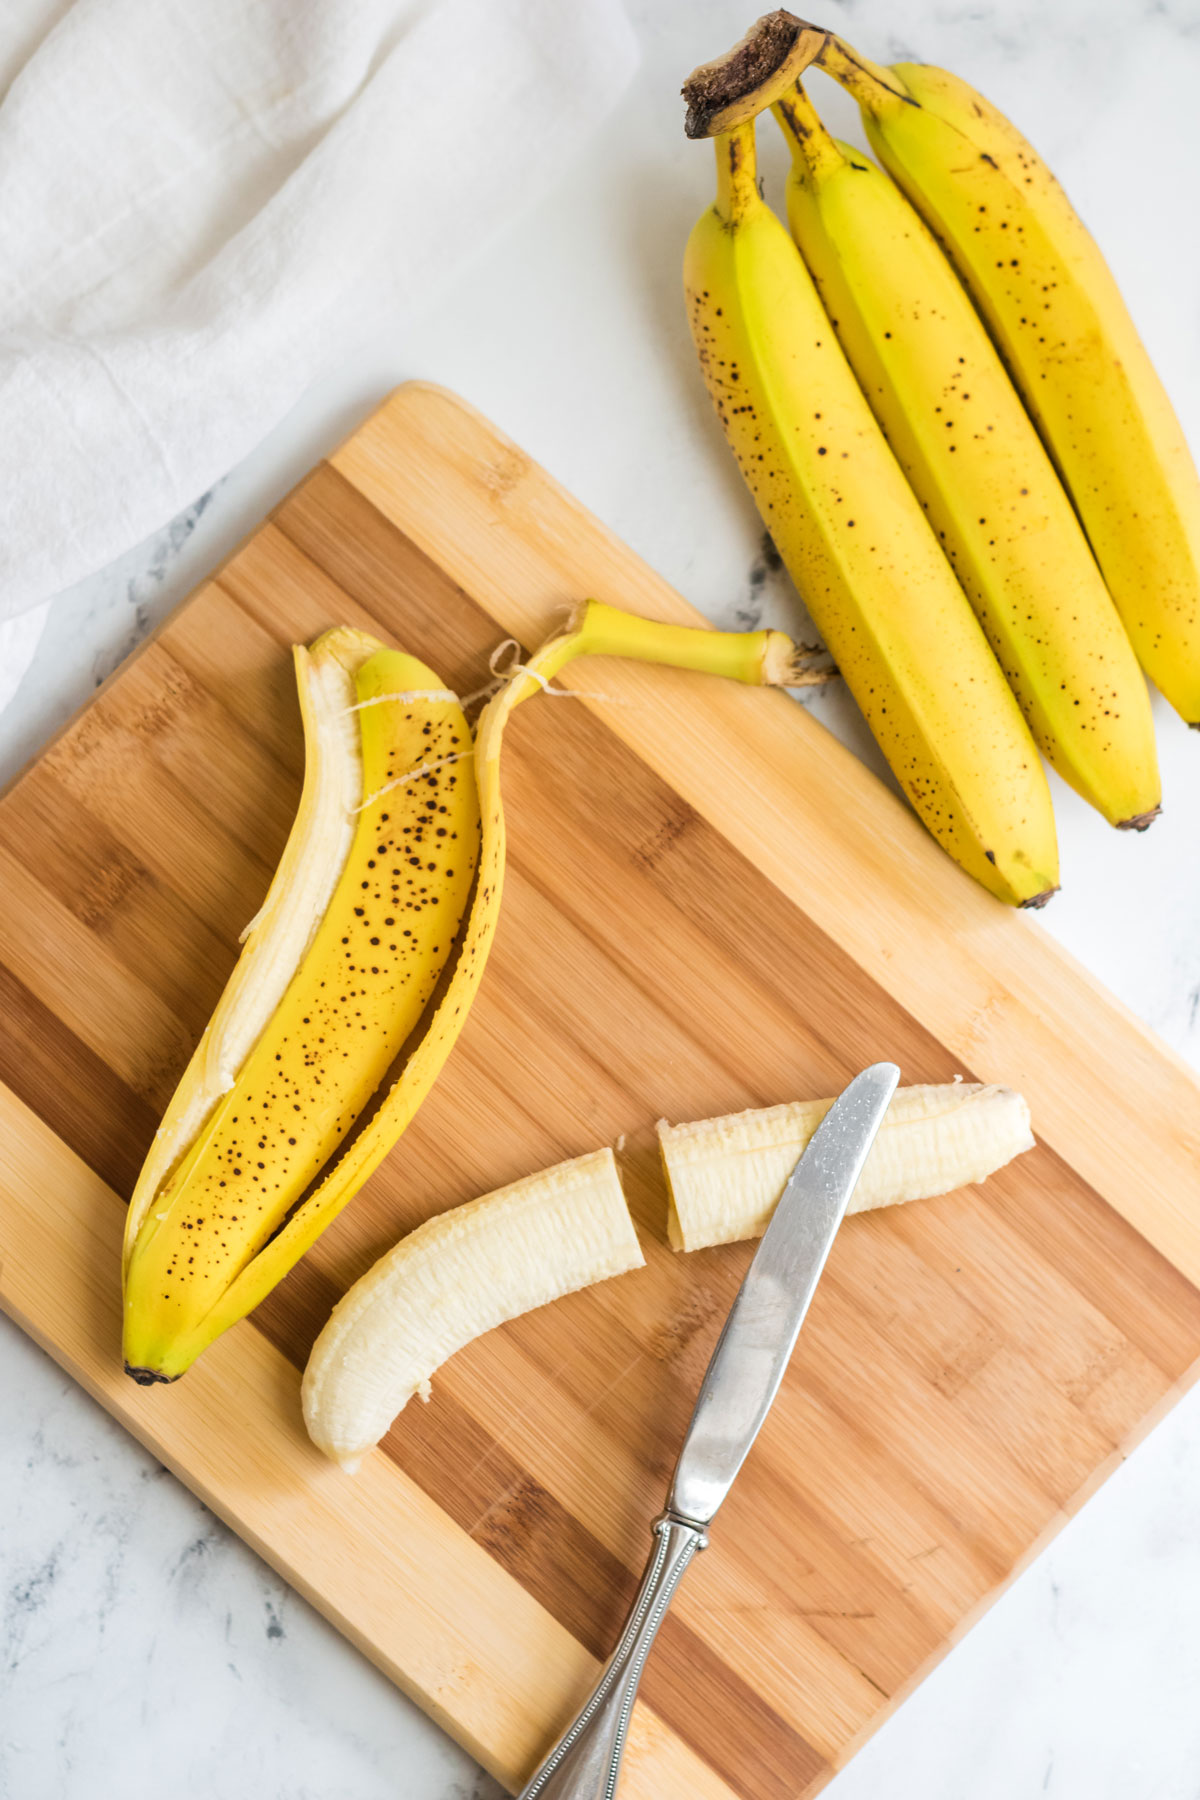 Top view of a chopping board with a banana cut in half on it, and a bunch of whole bananas sitting next to the board. 